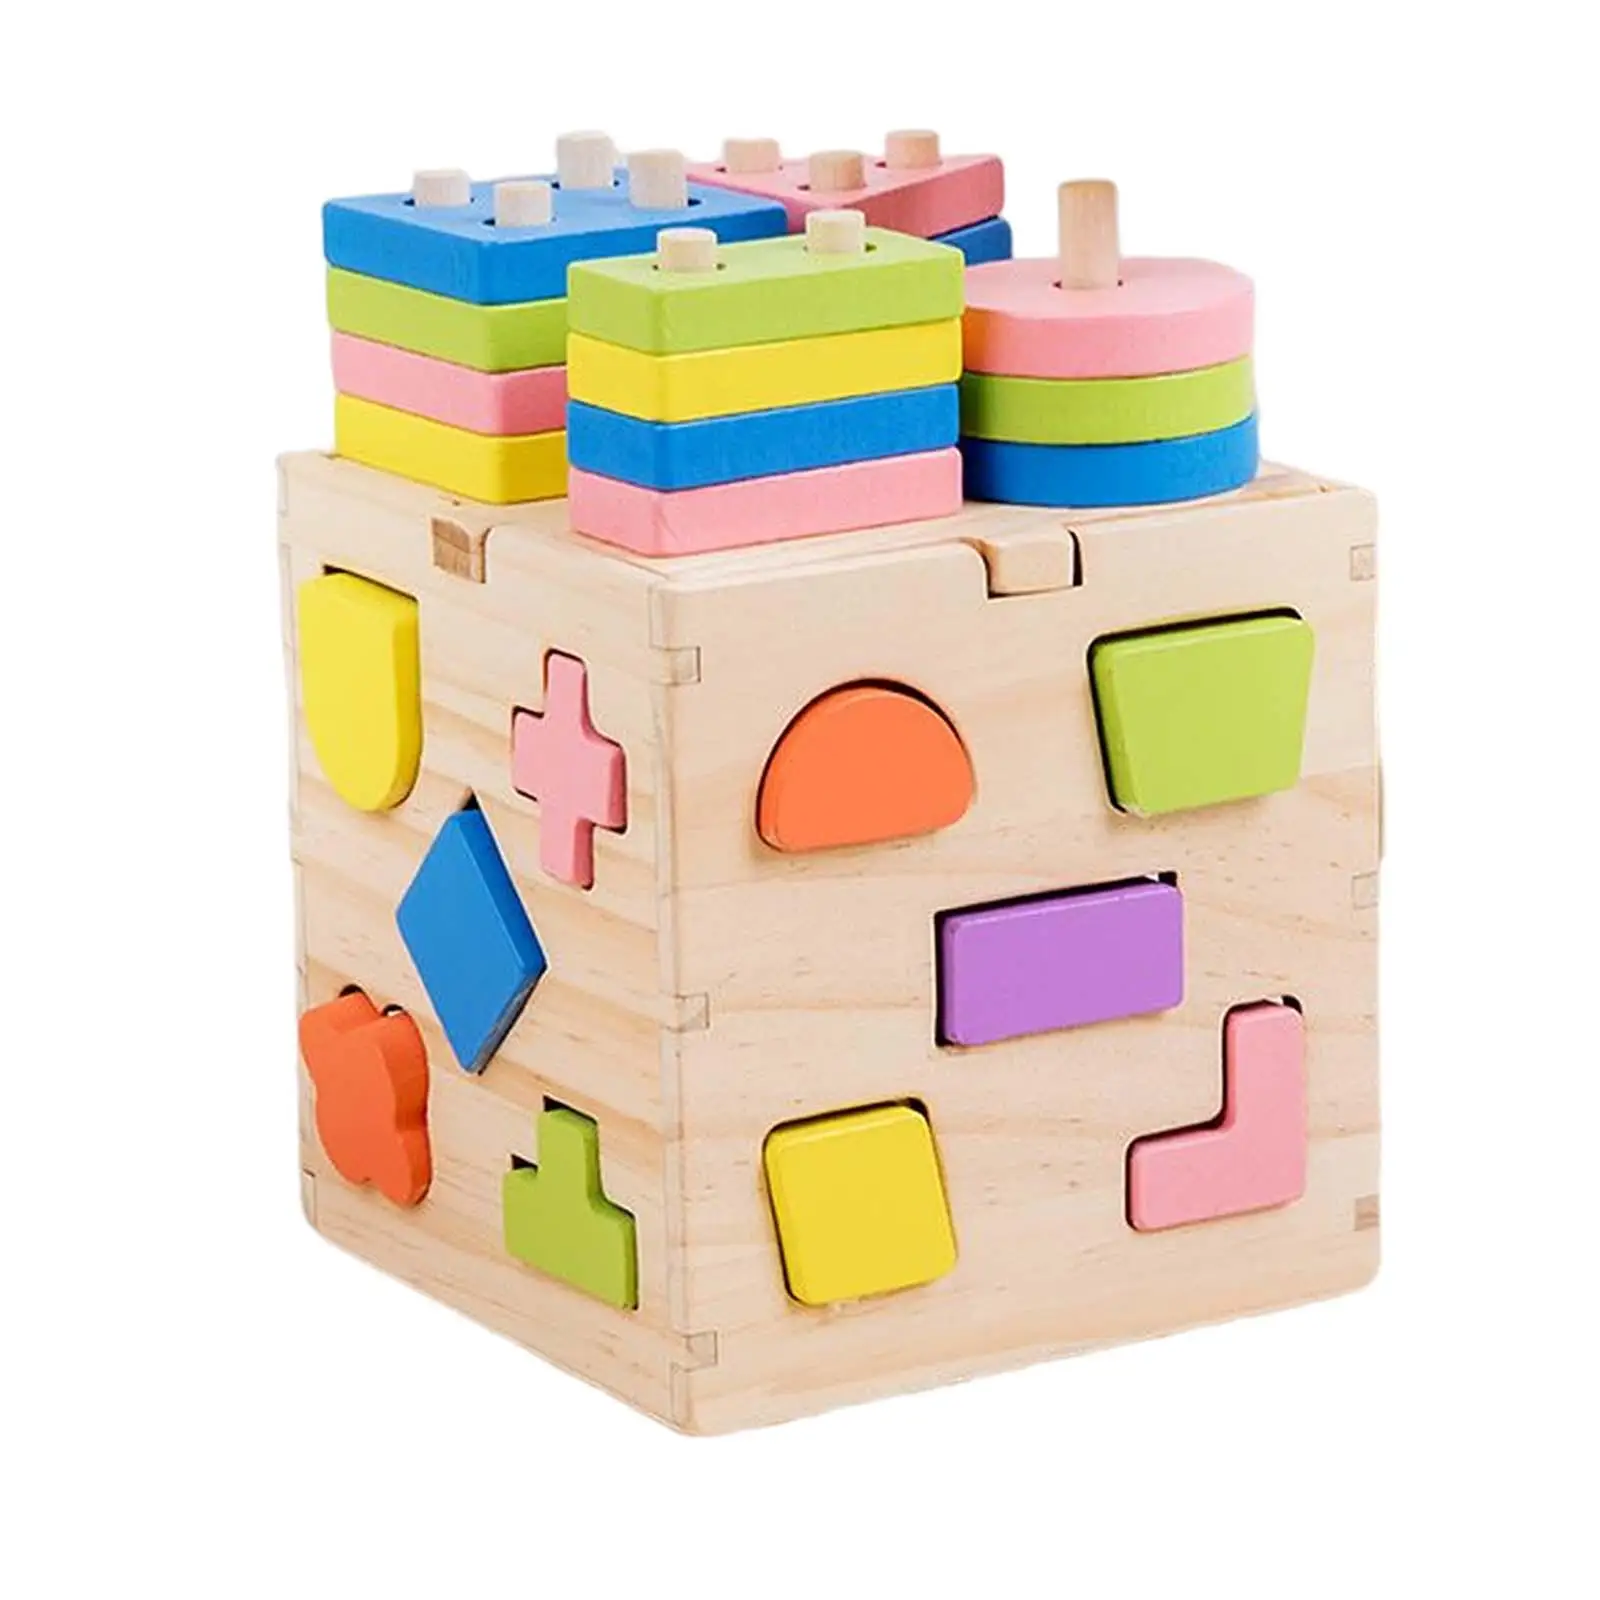 Wooden Block Toys Early Educational Learning Toy for Kids Holiday Gifts